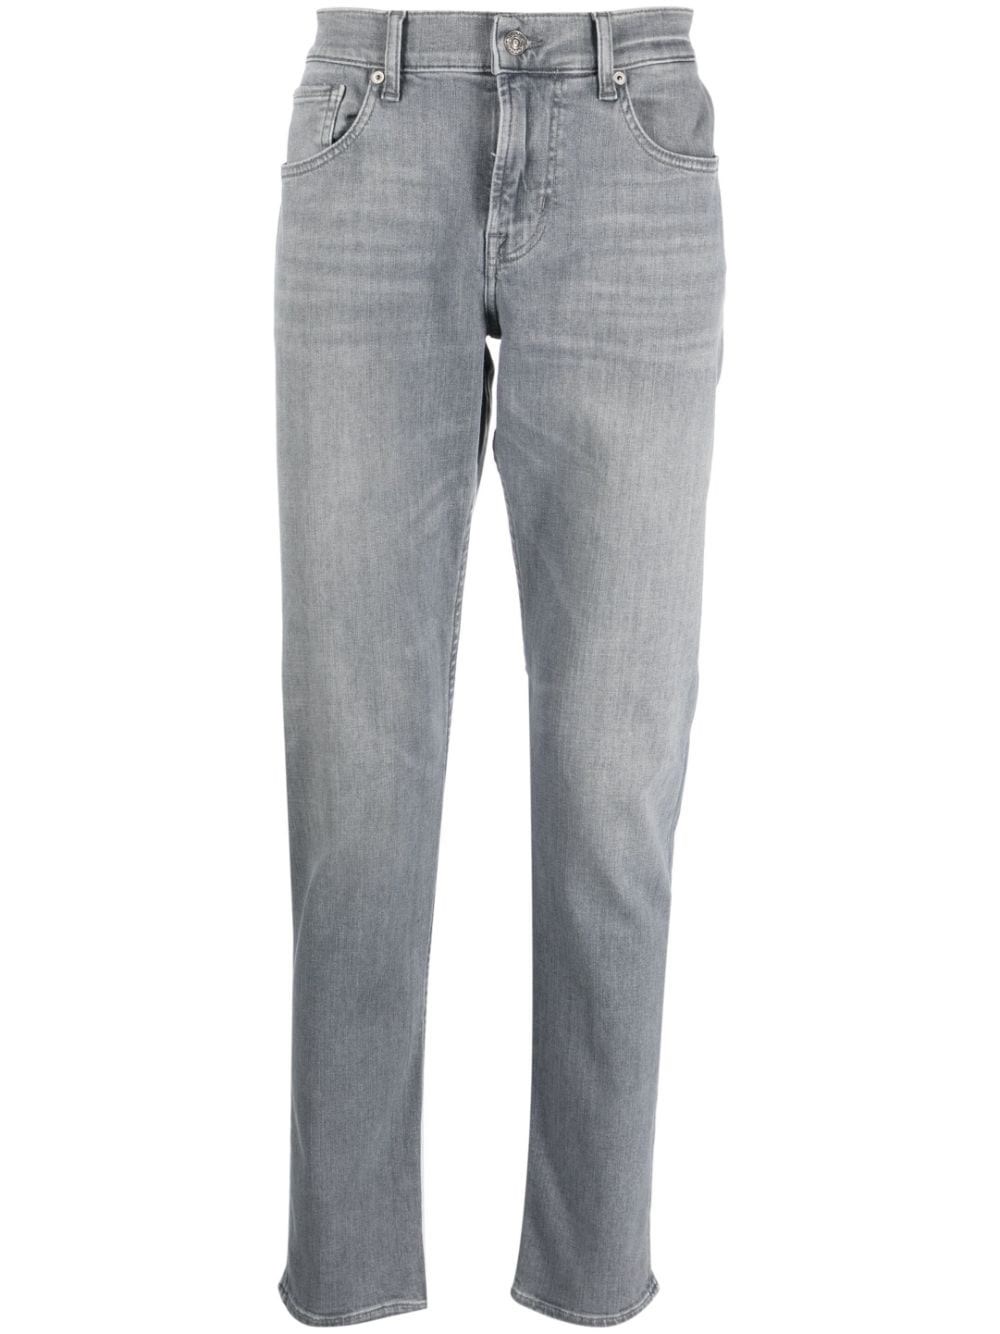 7 FOR ALL MANKIND `SLIMMY TAPERED STRETCH TEK LABYRINTH` JEANS